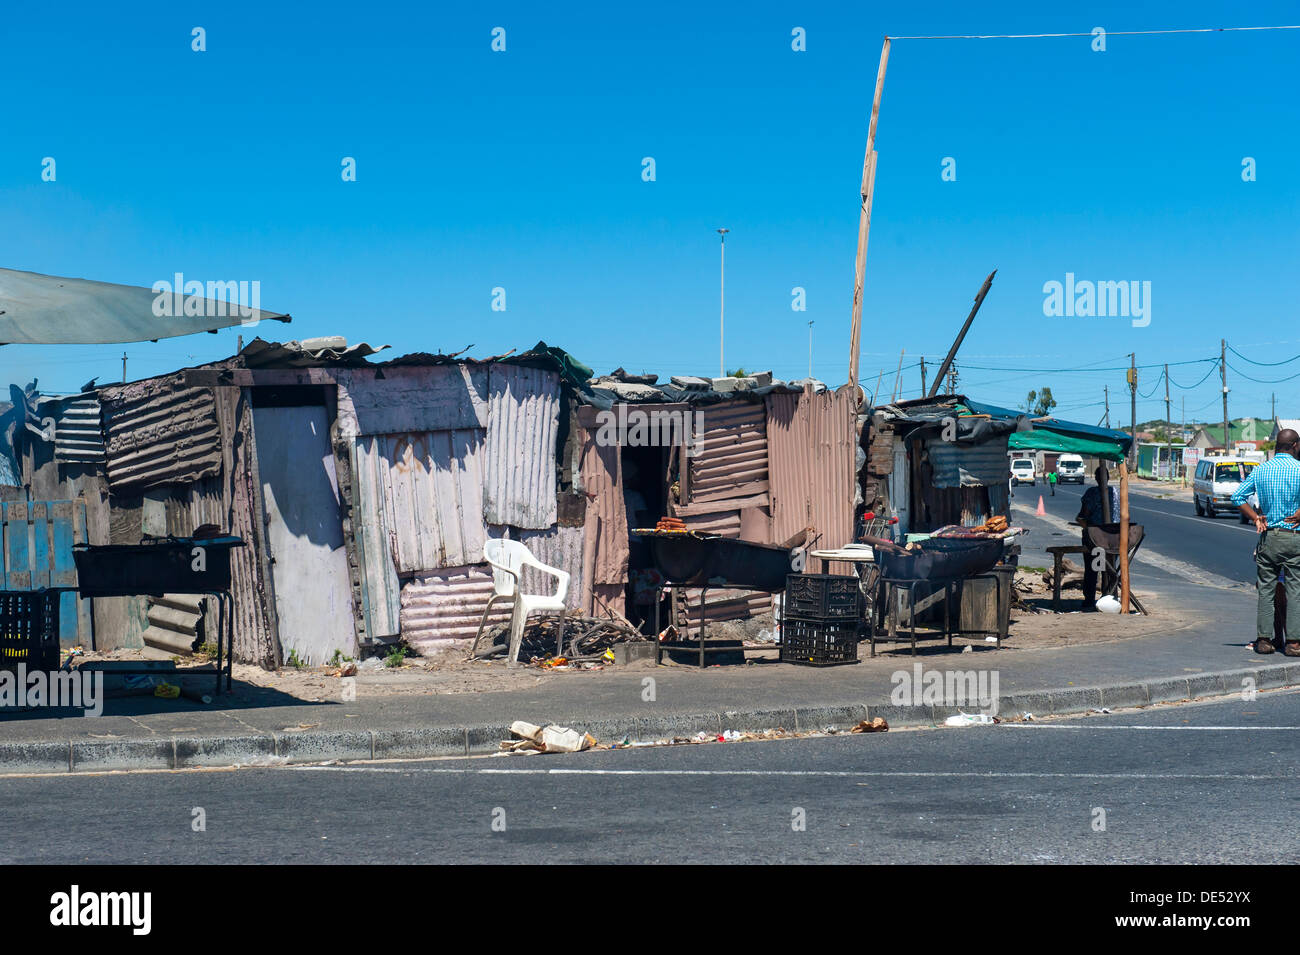 Tin shacks in Khayelitsha, a partially informal township in Cape Town, South Africa Stock Photo